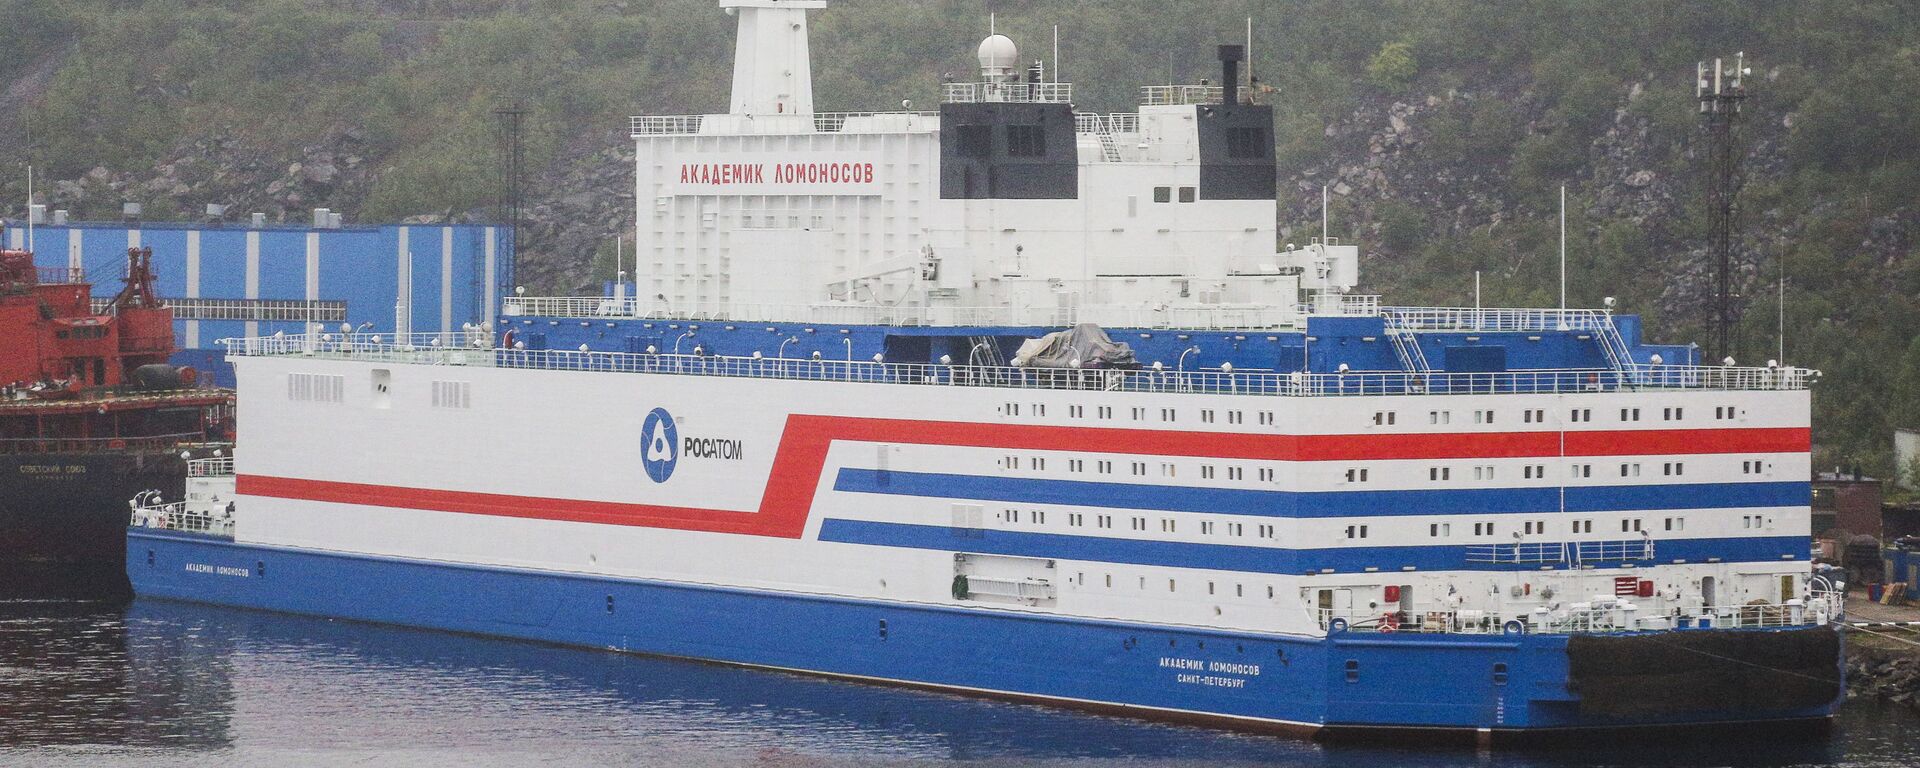 The world's first floating nuclear power plant (NPP) Akademik Lomonosov is pictured at the port of Murmansk, Russia.  - Sputnik International, 1920, 24.04.2023